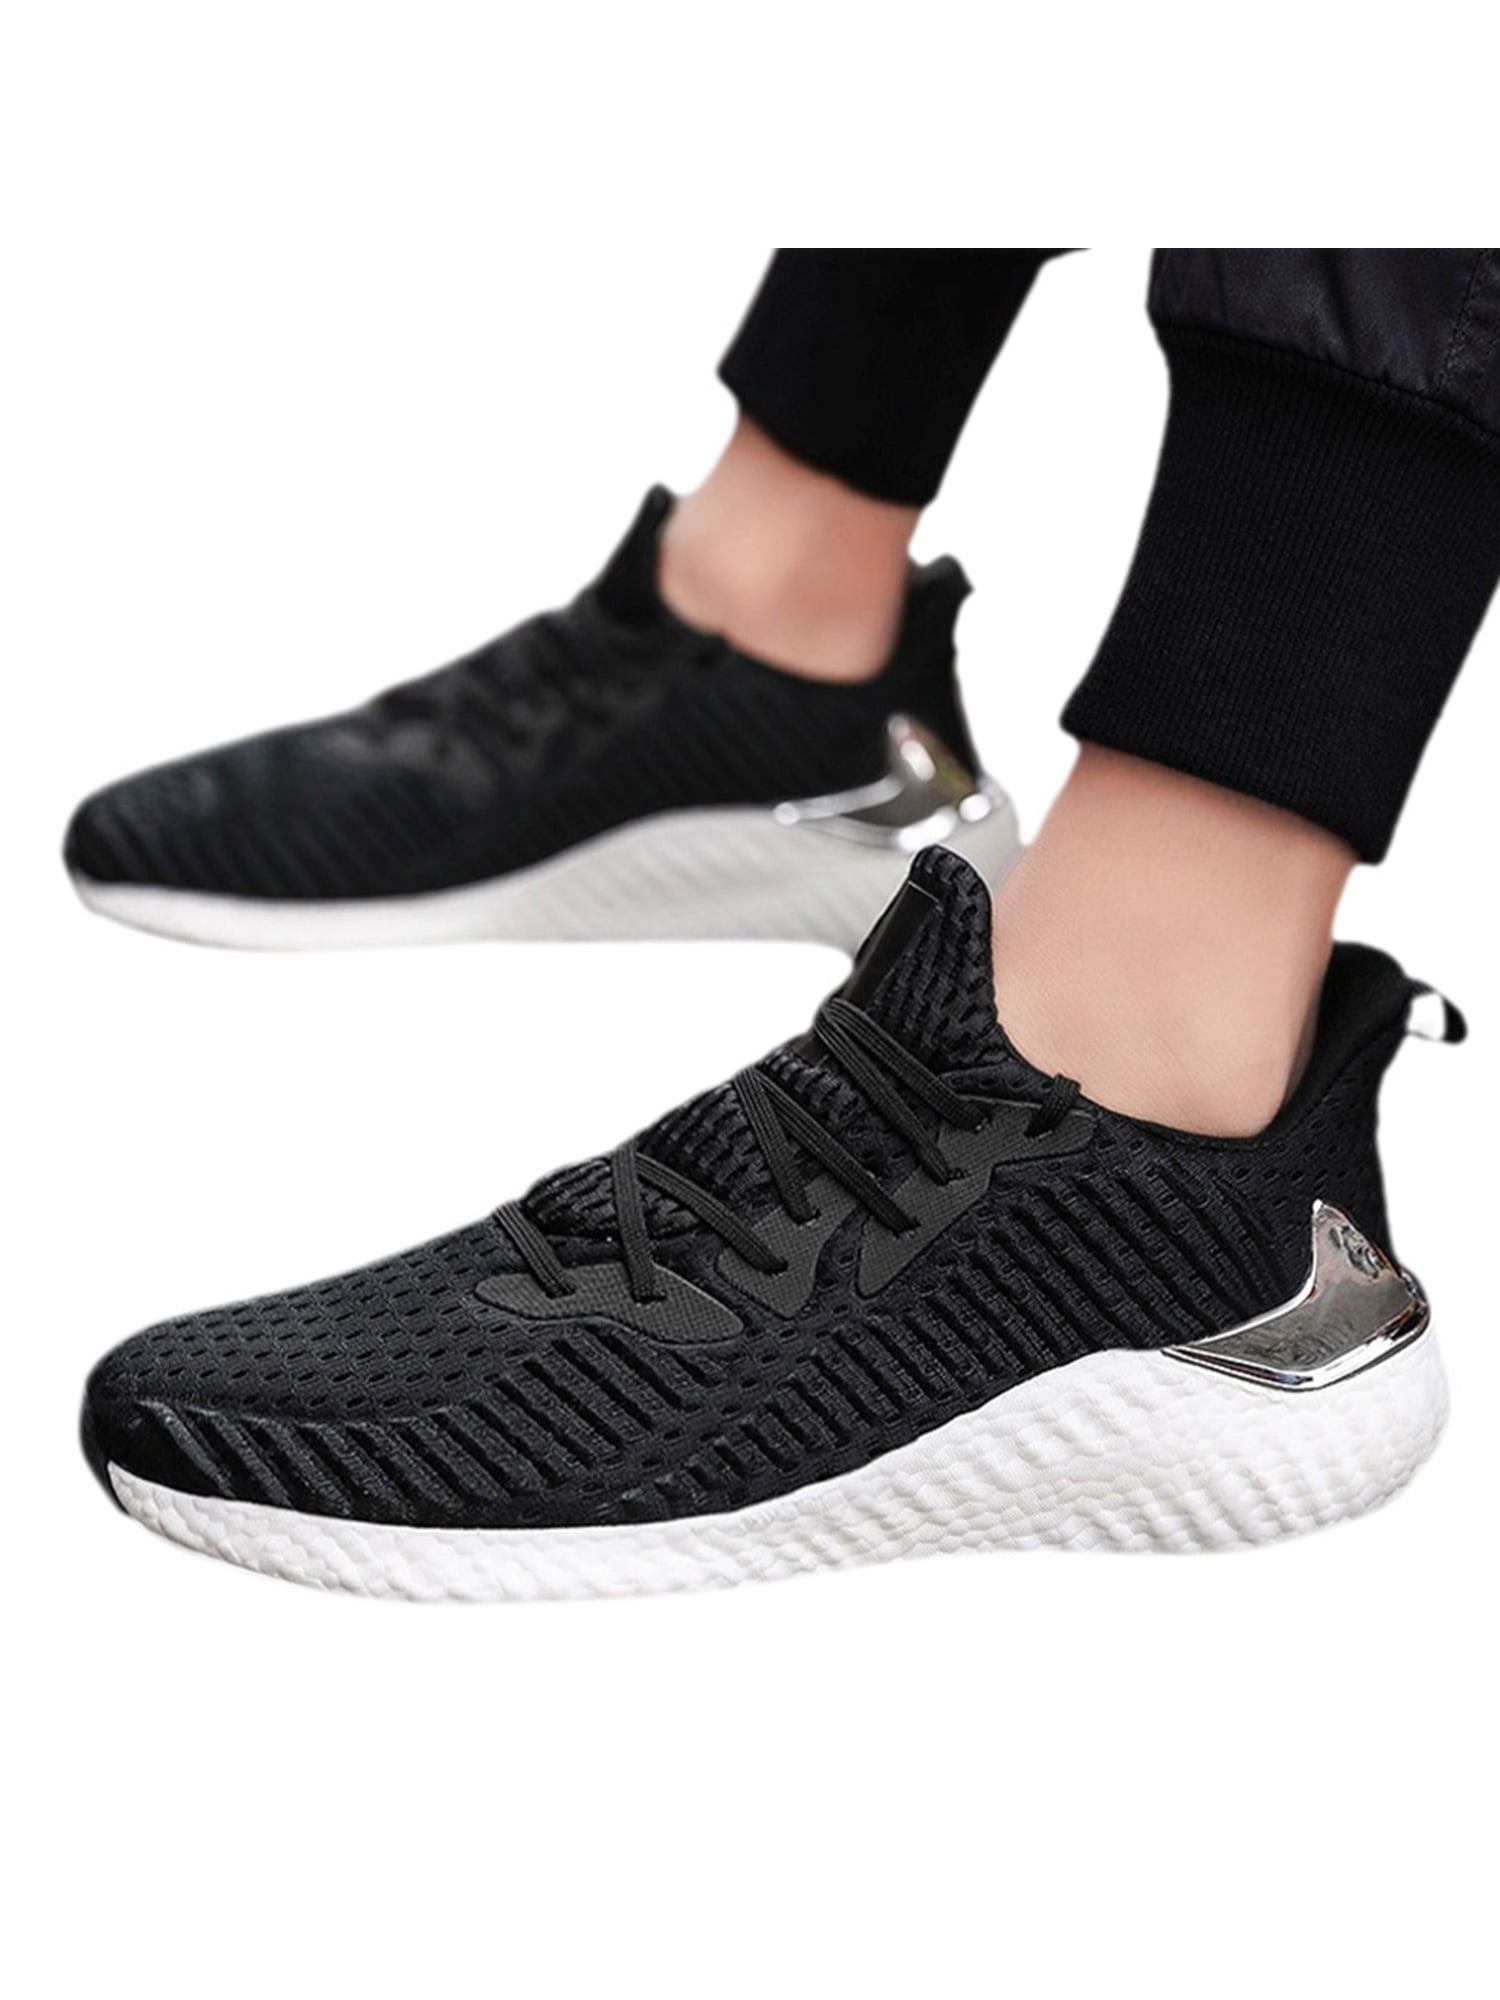 Mens Running Ice Cream Shoes Fashion Breathable Sneakers Mesh Soft Sole Casual Athletic Lightweight